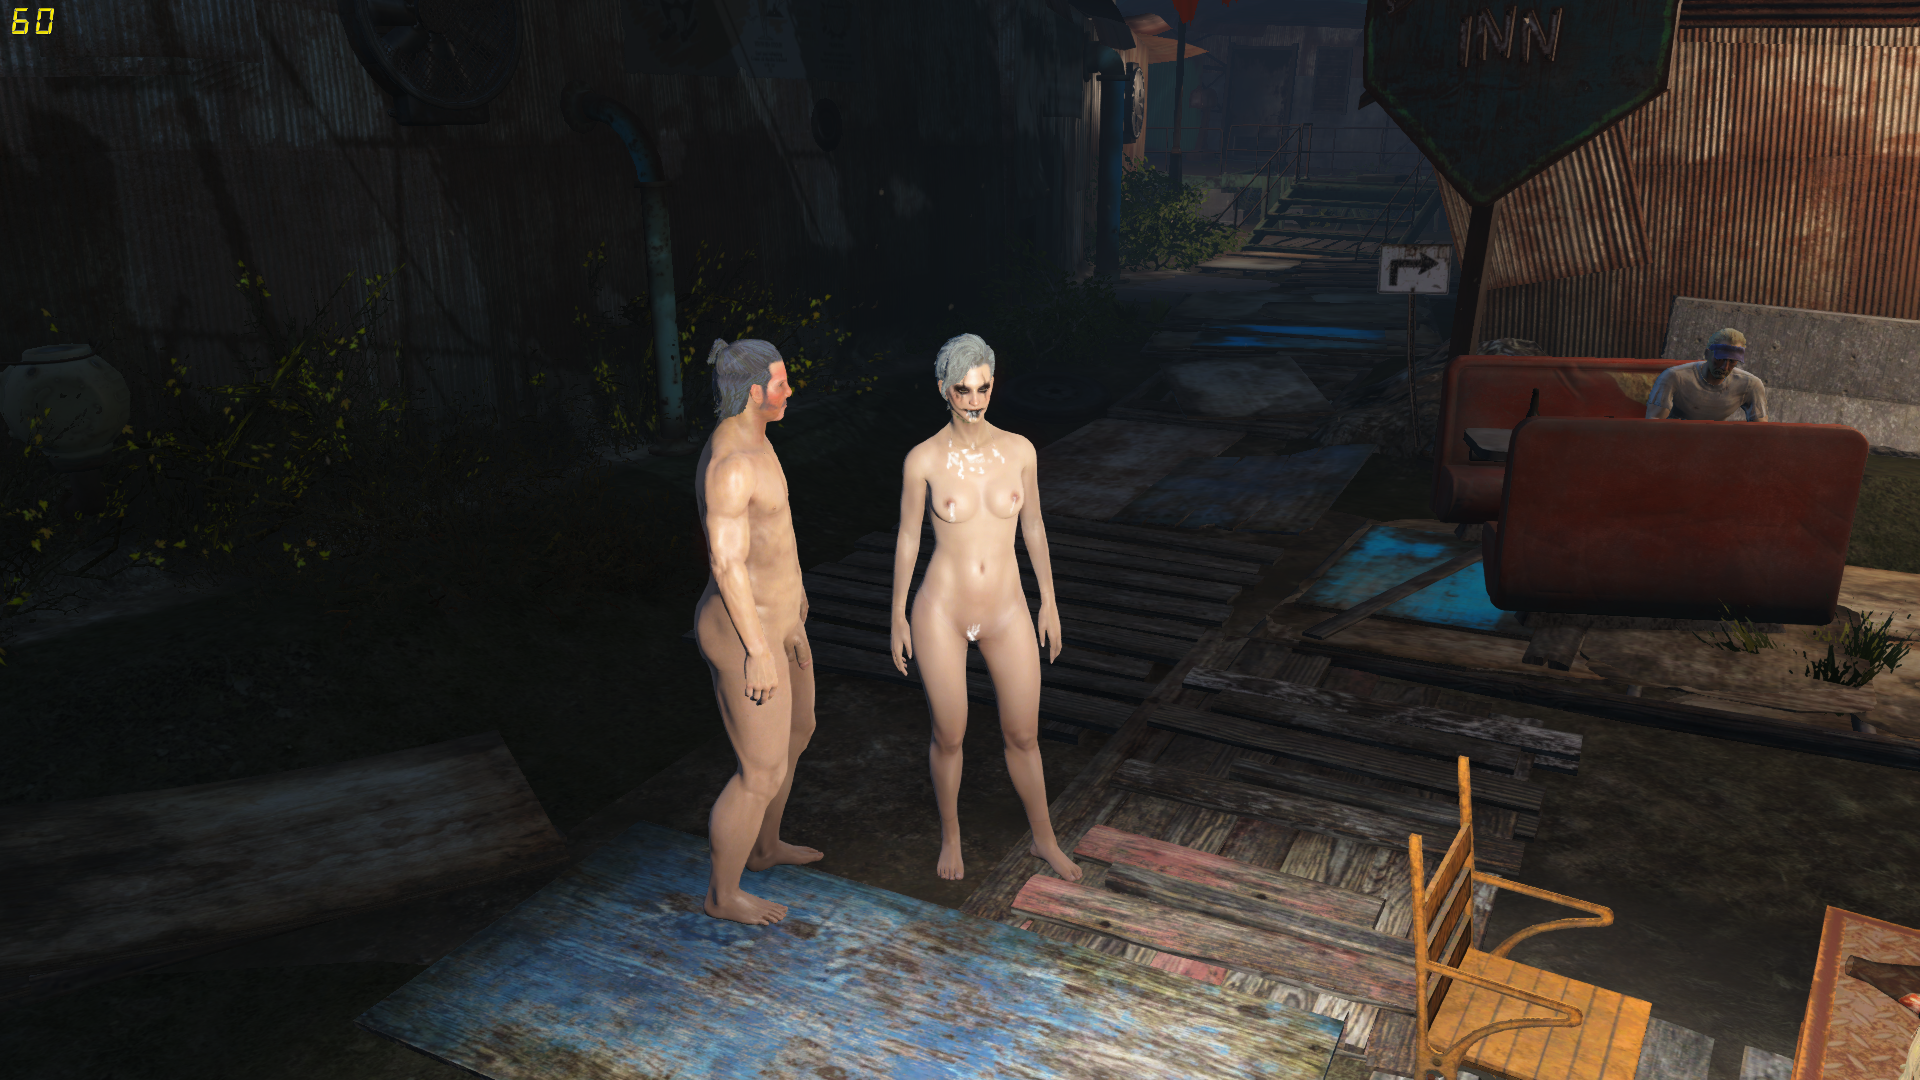 The fallout naked scene